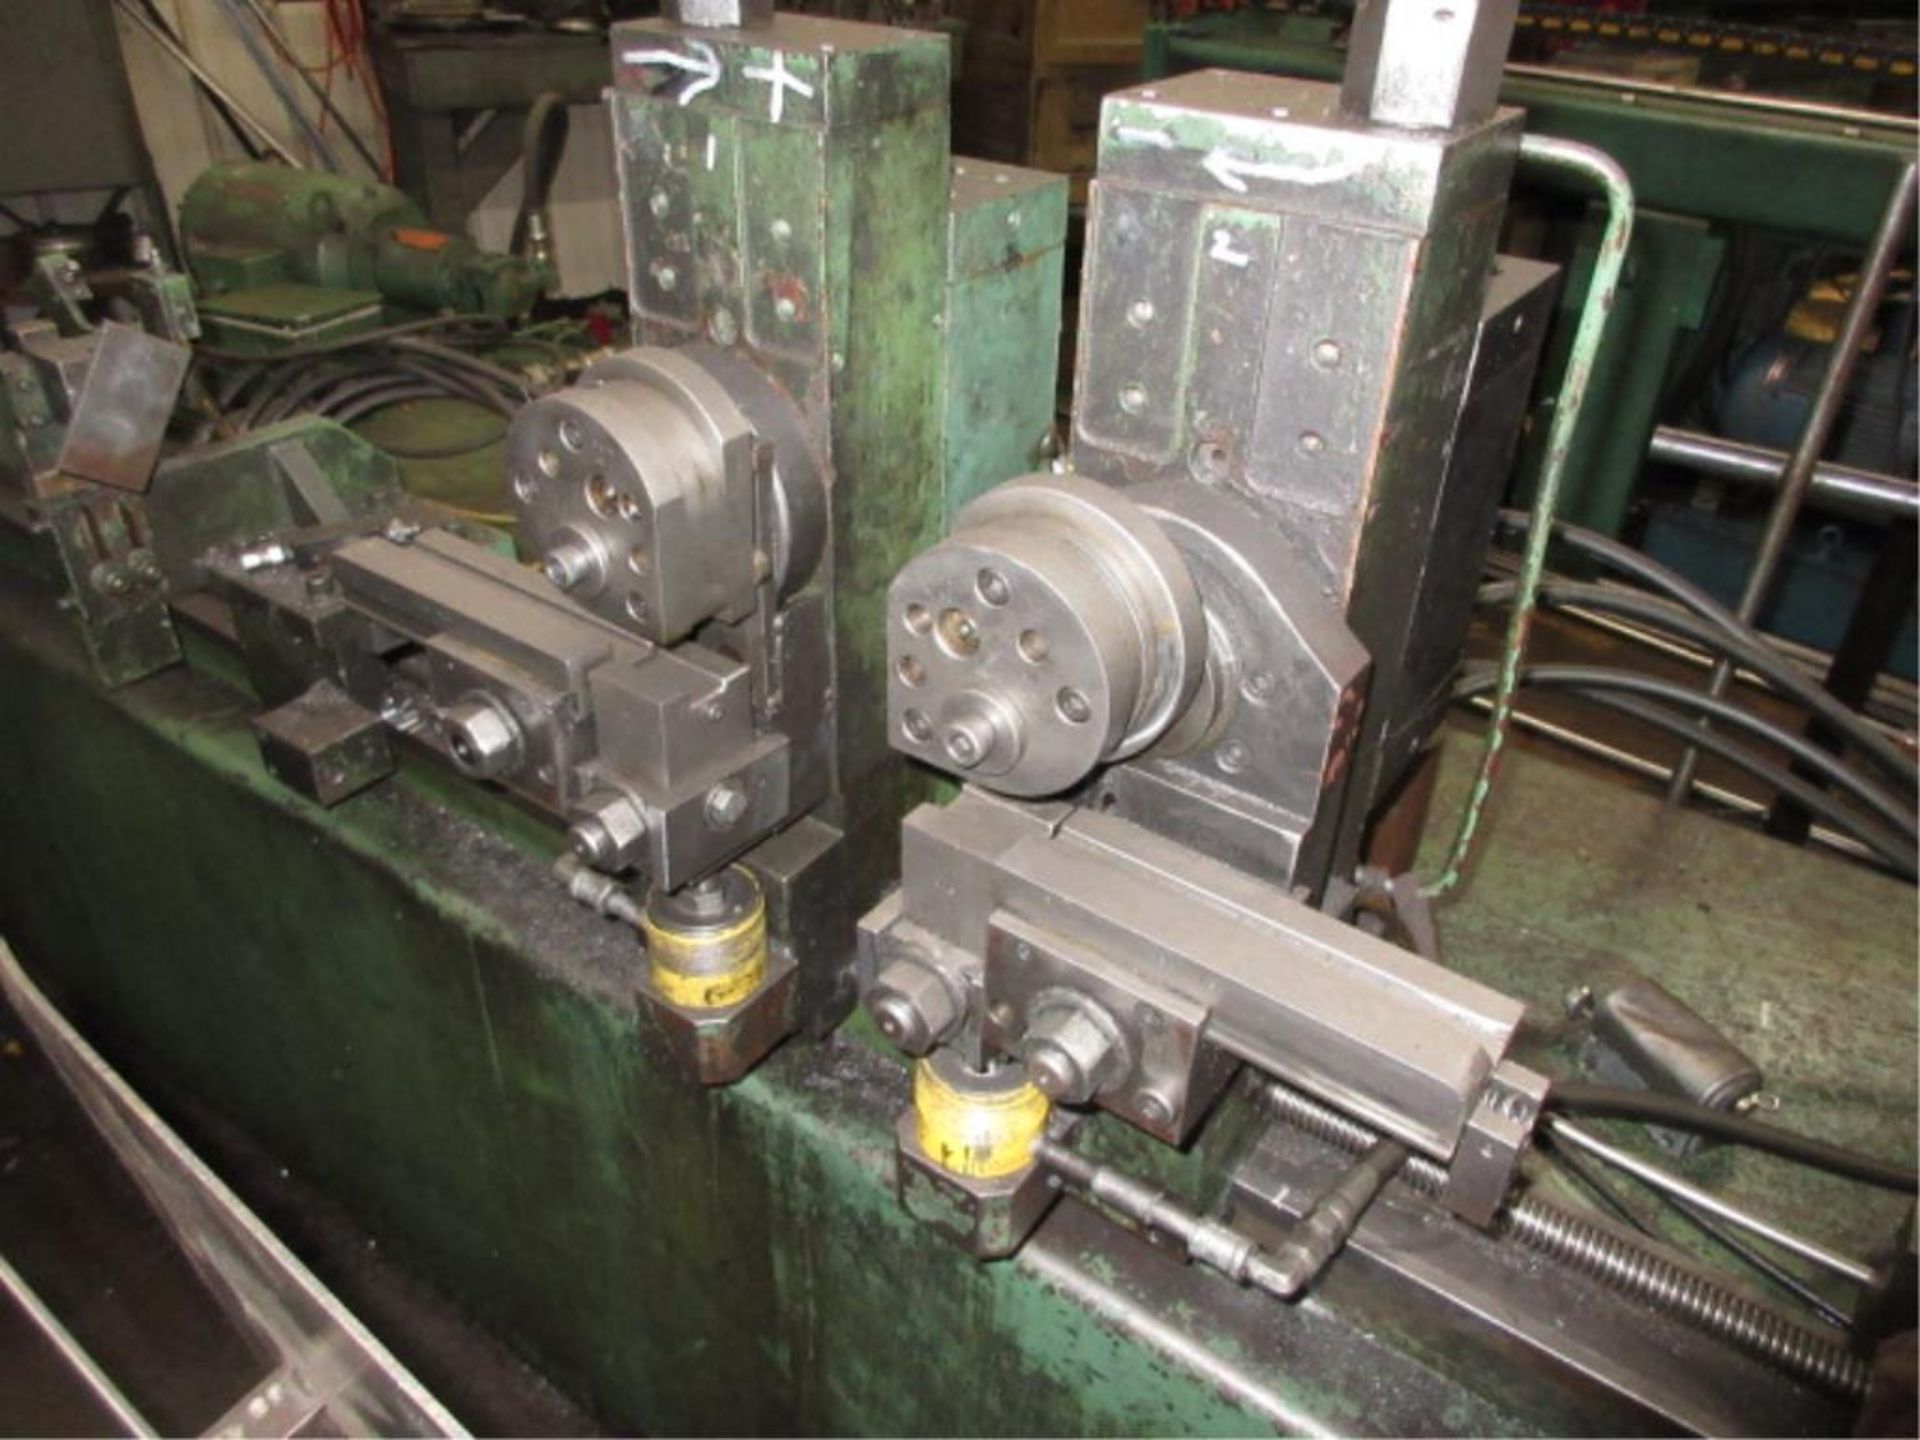 Criterion Hydraulic Bender. Criterion Hydraulic Bender, Racine 20-hp hydraulic unit, tooling not - Image 2 of 7